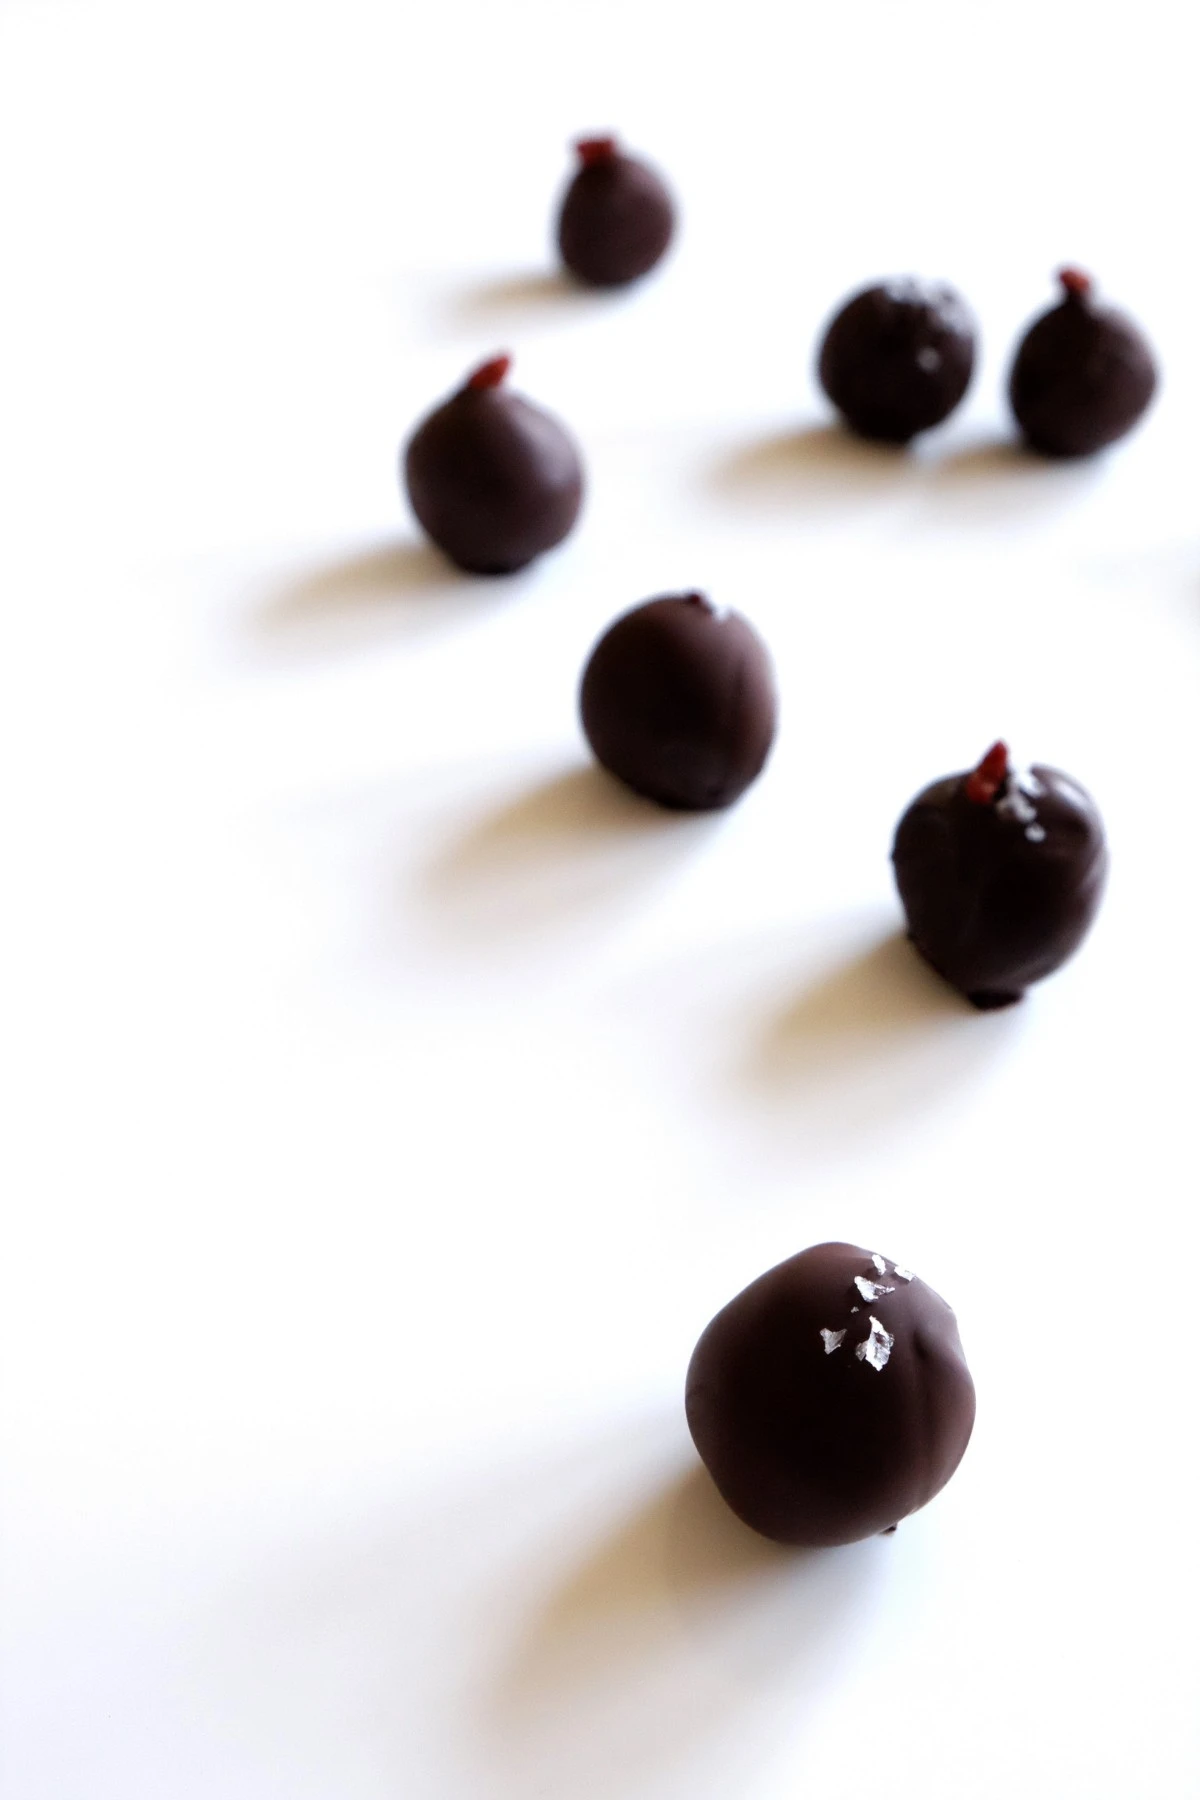 Superfood cacao Royal Ghee bon bons with benefits